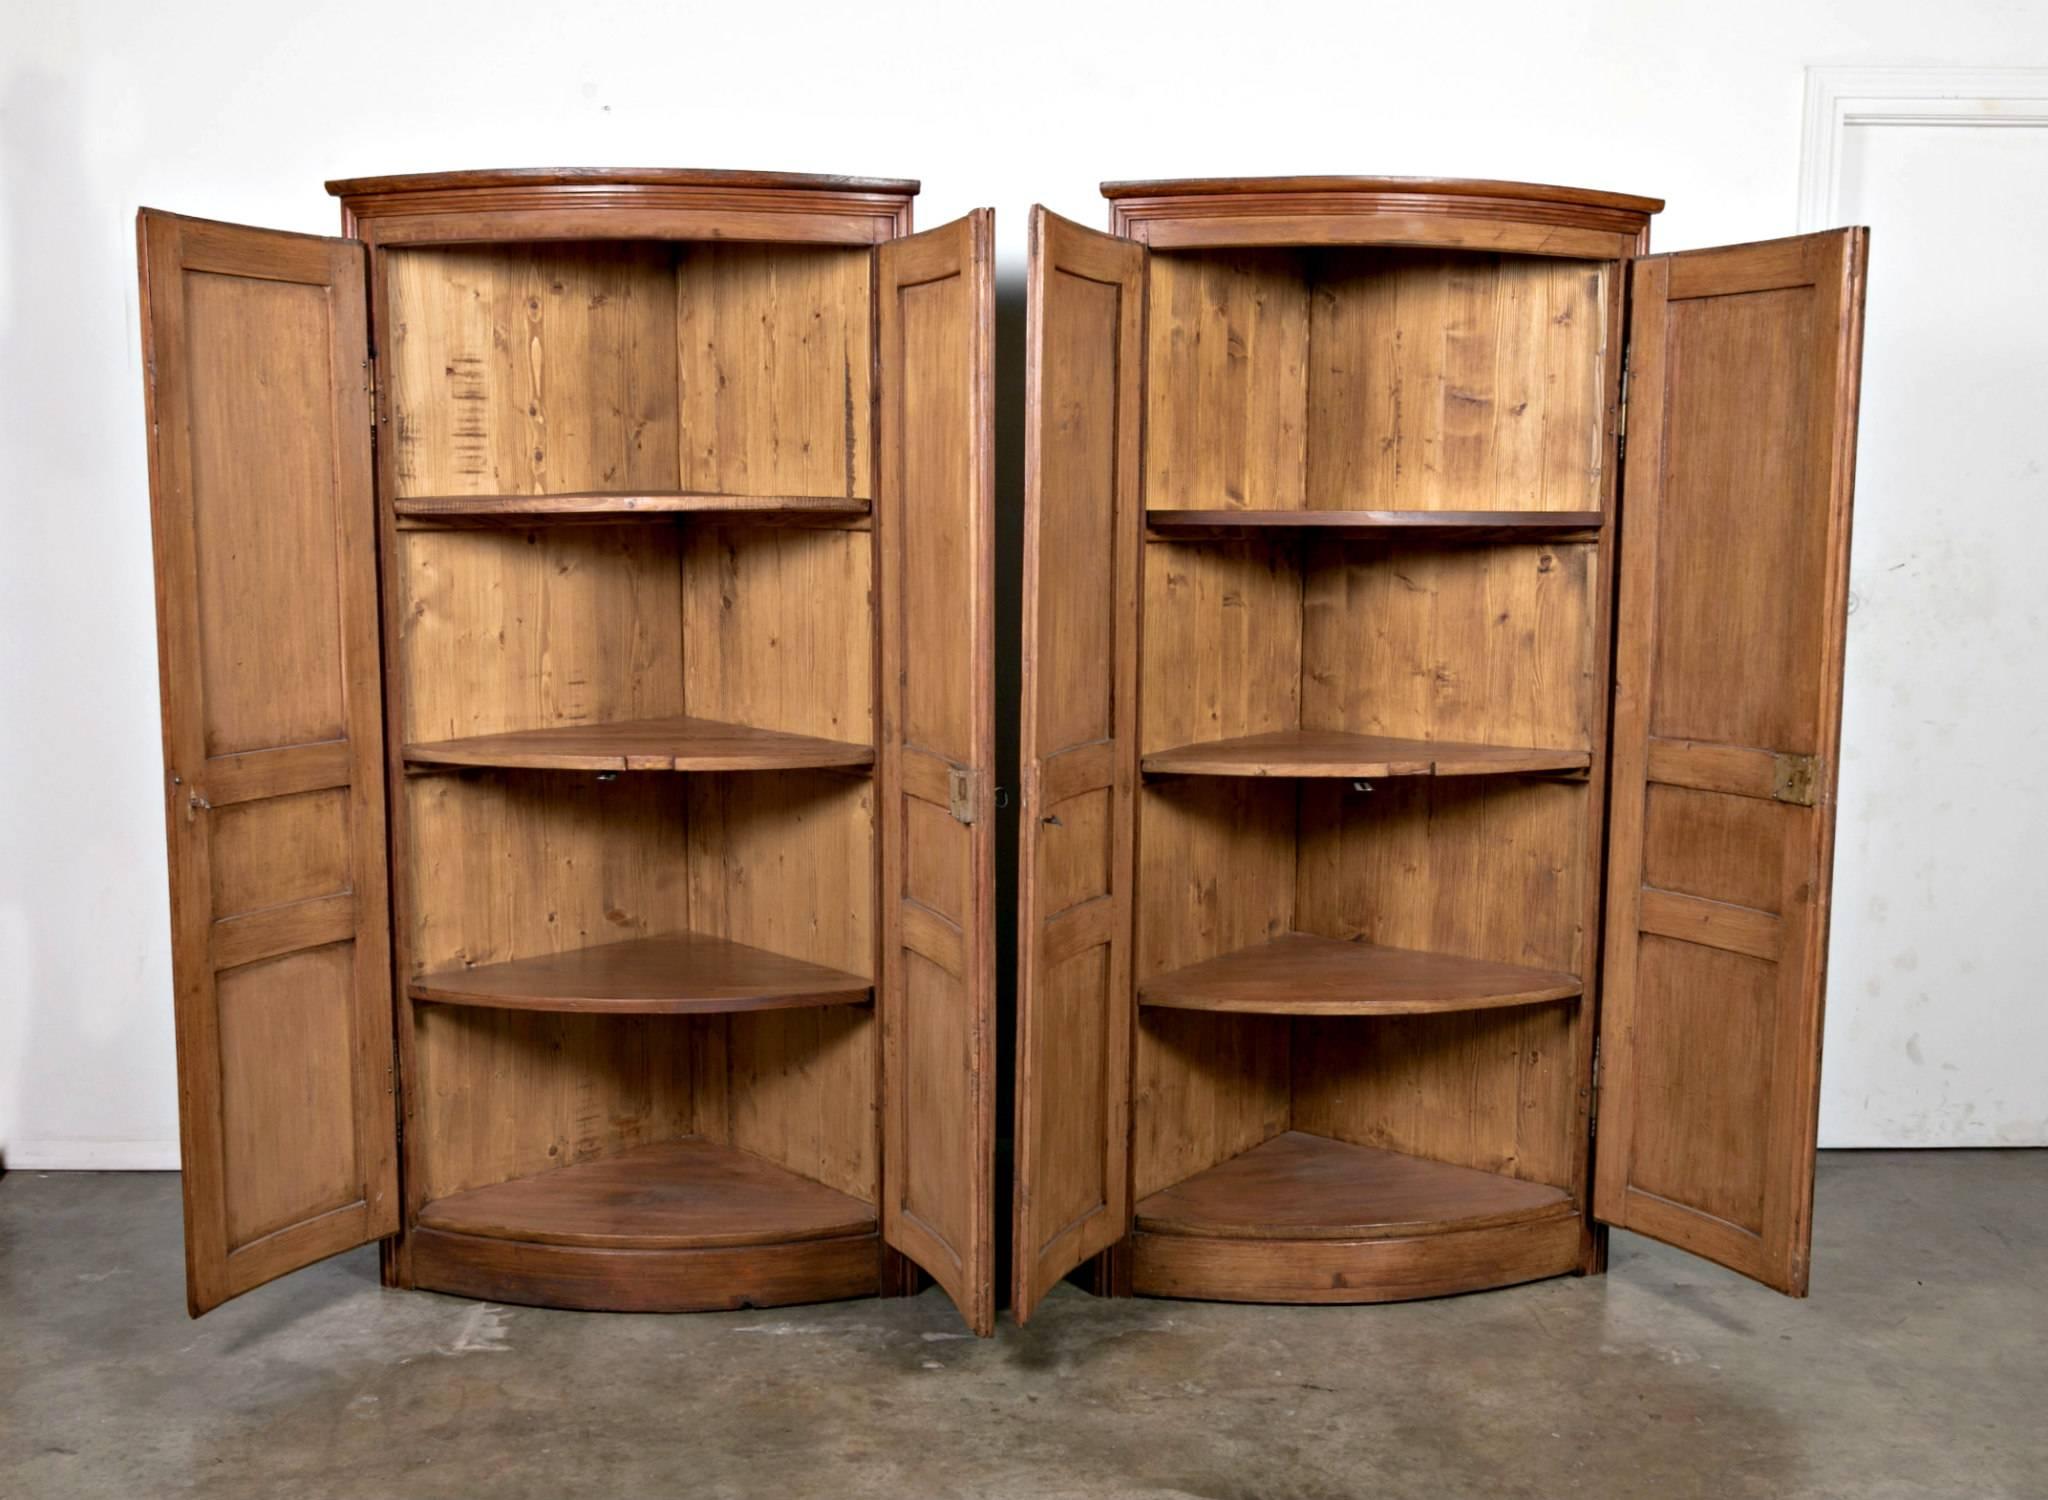 A wonderful pair of pine corner cabinets crafted from antique French boiseries panels. Ample shelving to the interior.

Dimensions:
Height 71 inches
Width 38 inches
Depth 24 inches
Corner 26 inches.